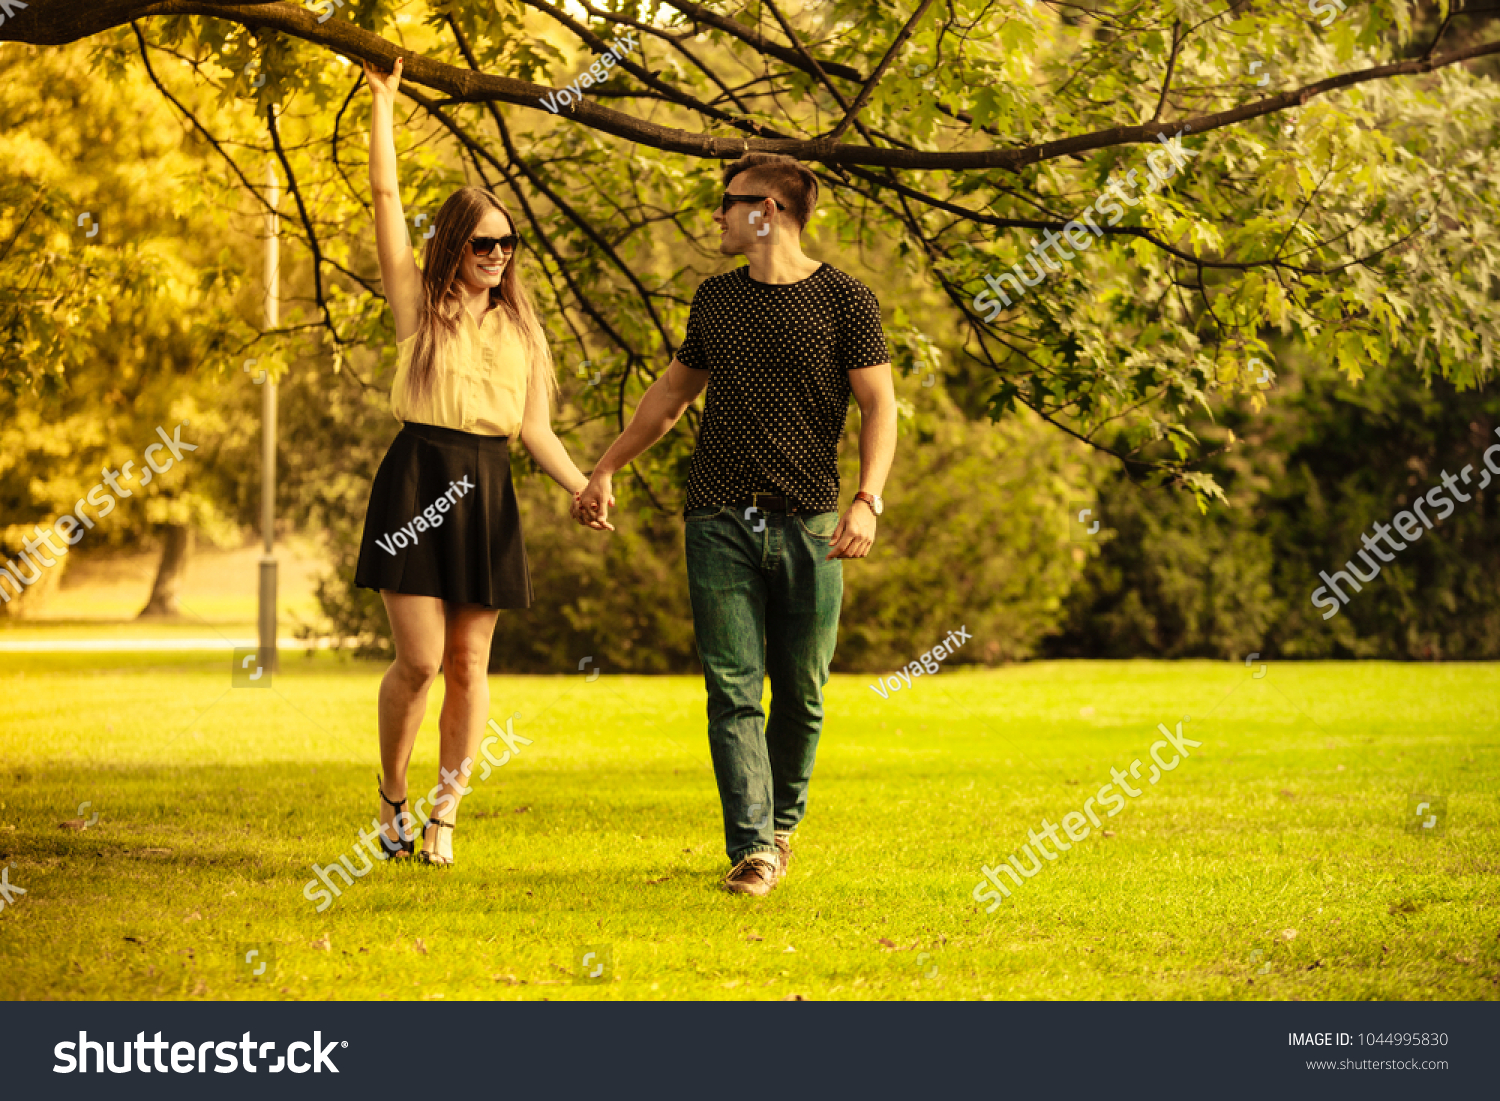 Park dating